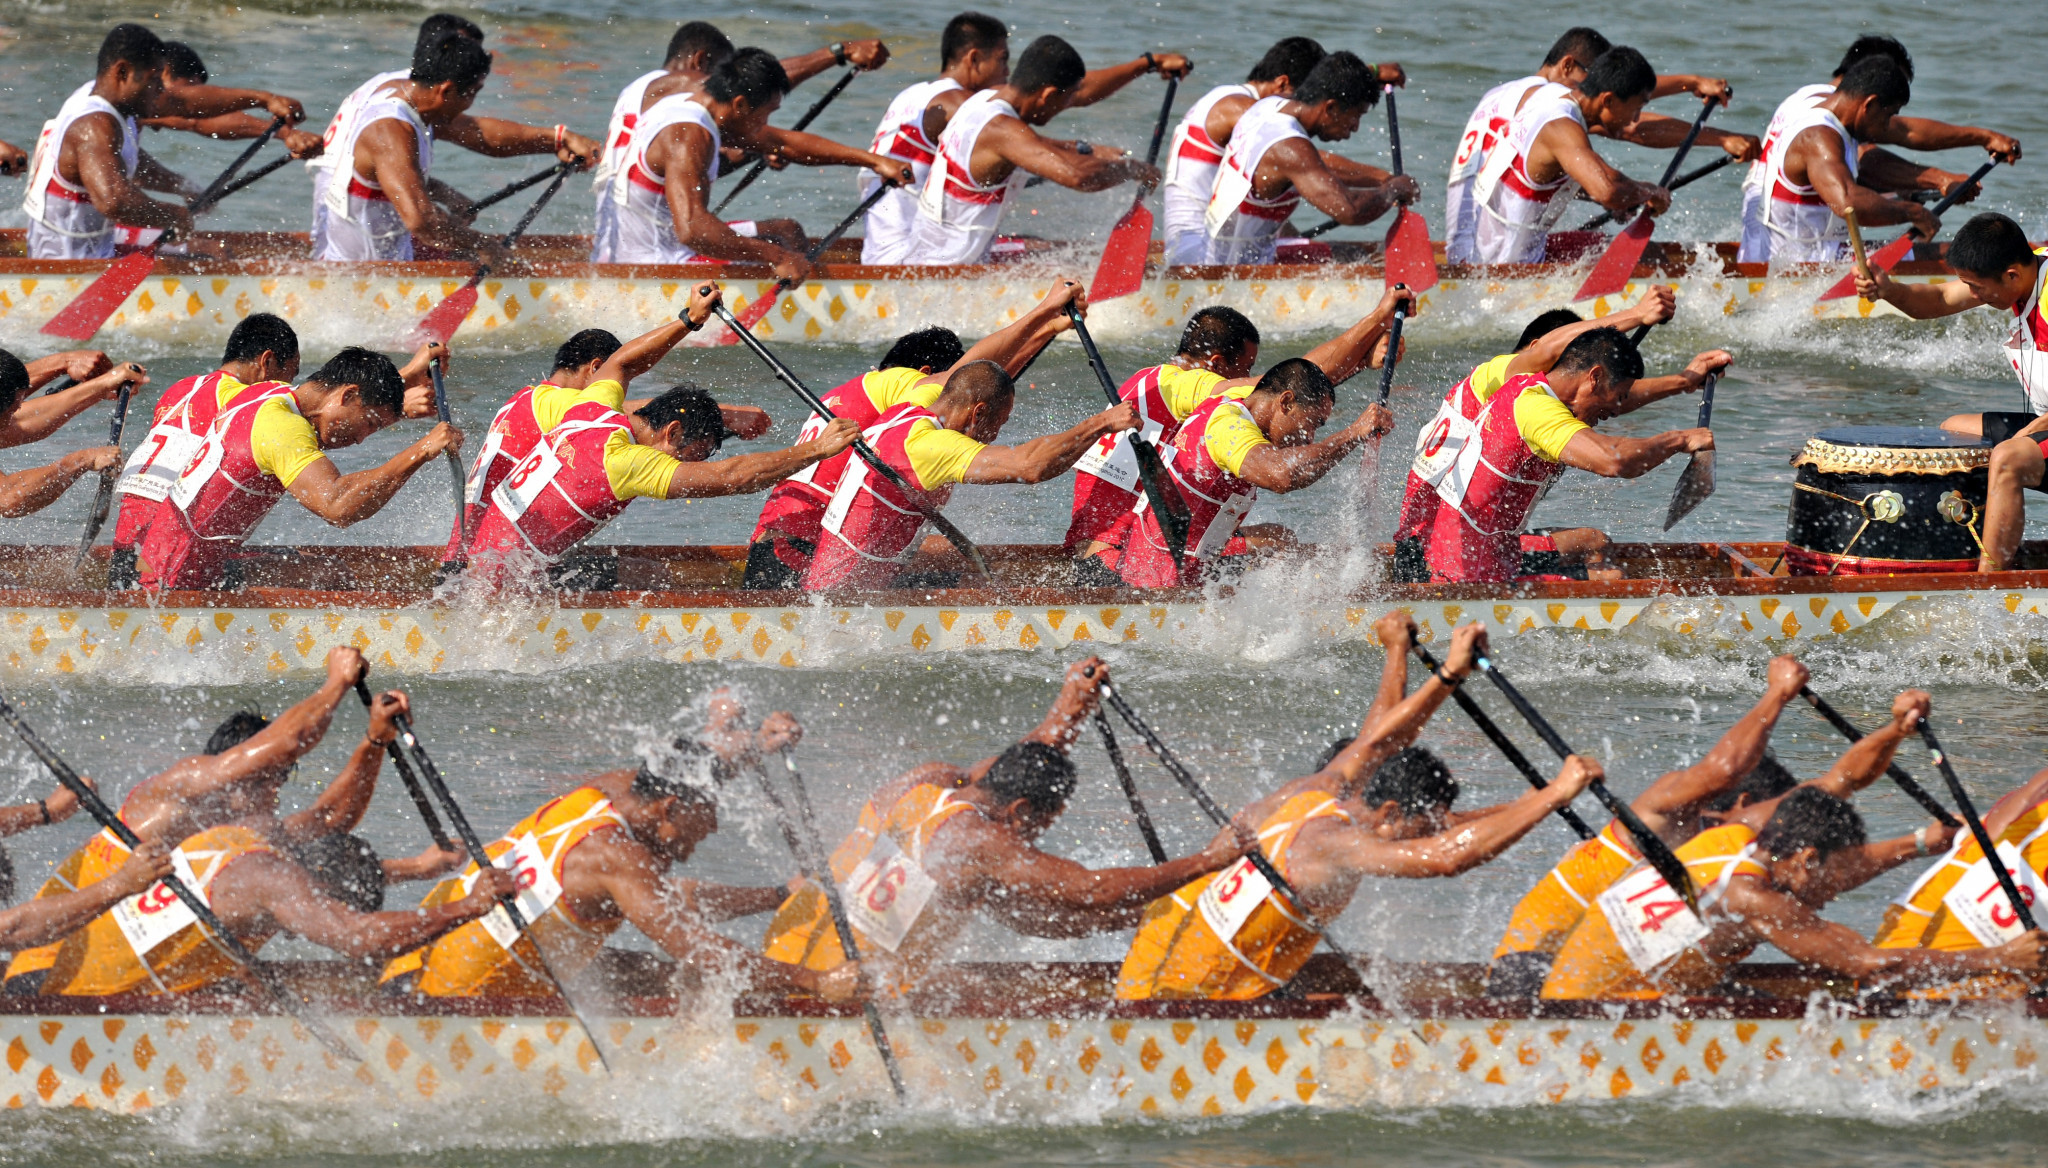 Dragon boat racing emerges as unlikely platform for inter Korean peace at Asian Games